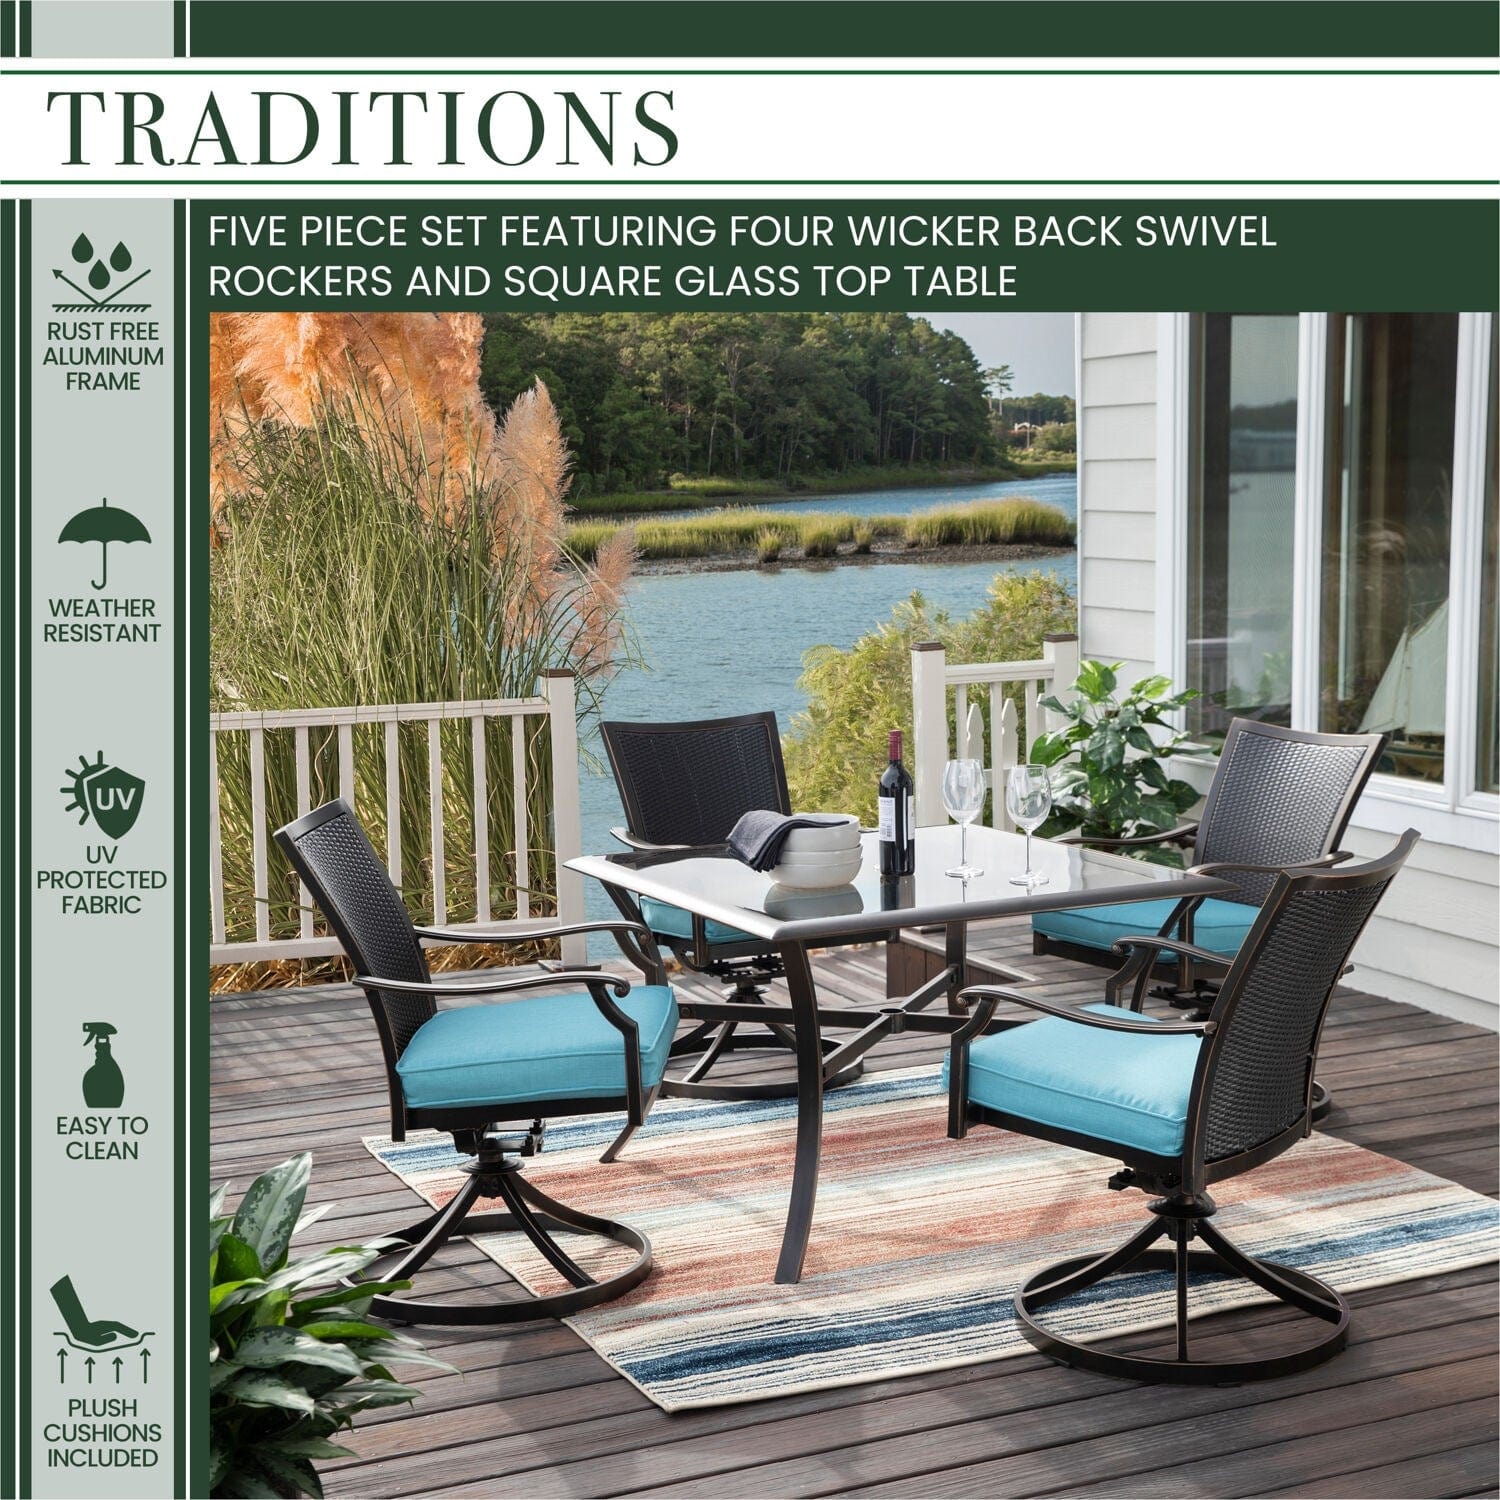 Hanover Outdoor Dining Set Hanover Traditions 5-Piece Dining Set in Blue with 4 Wicker Back Swivel Rockers and 42 in. Glass-Top Table